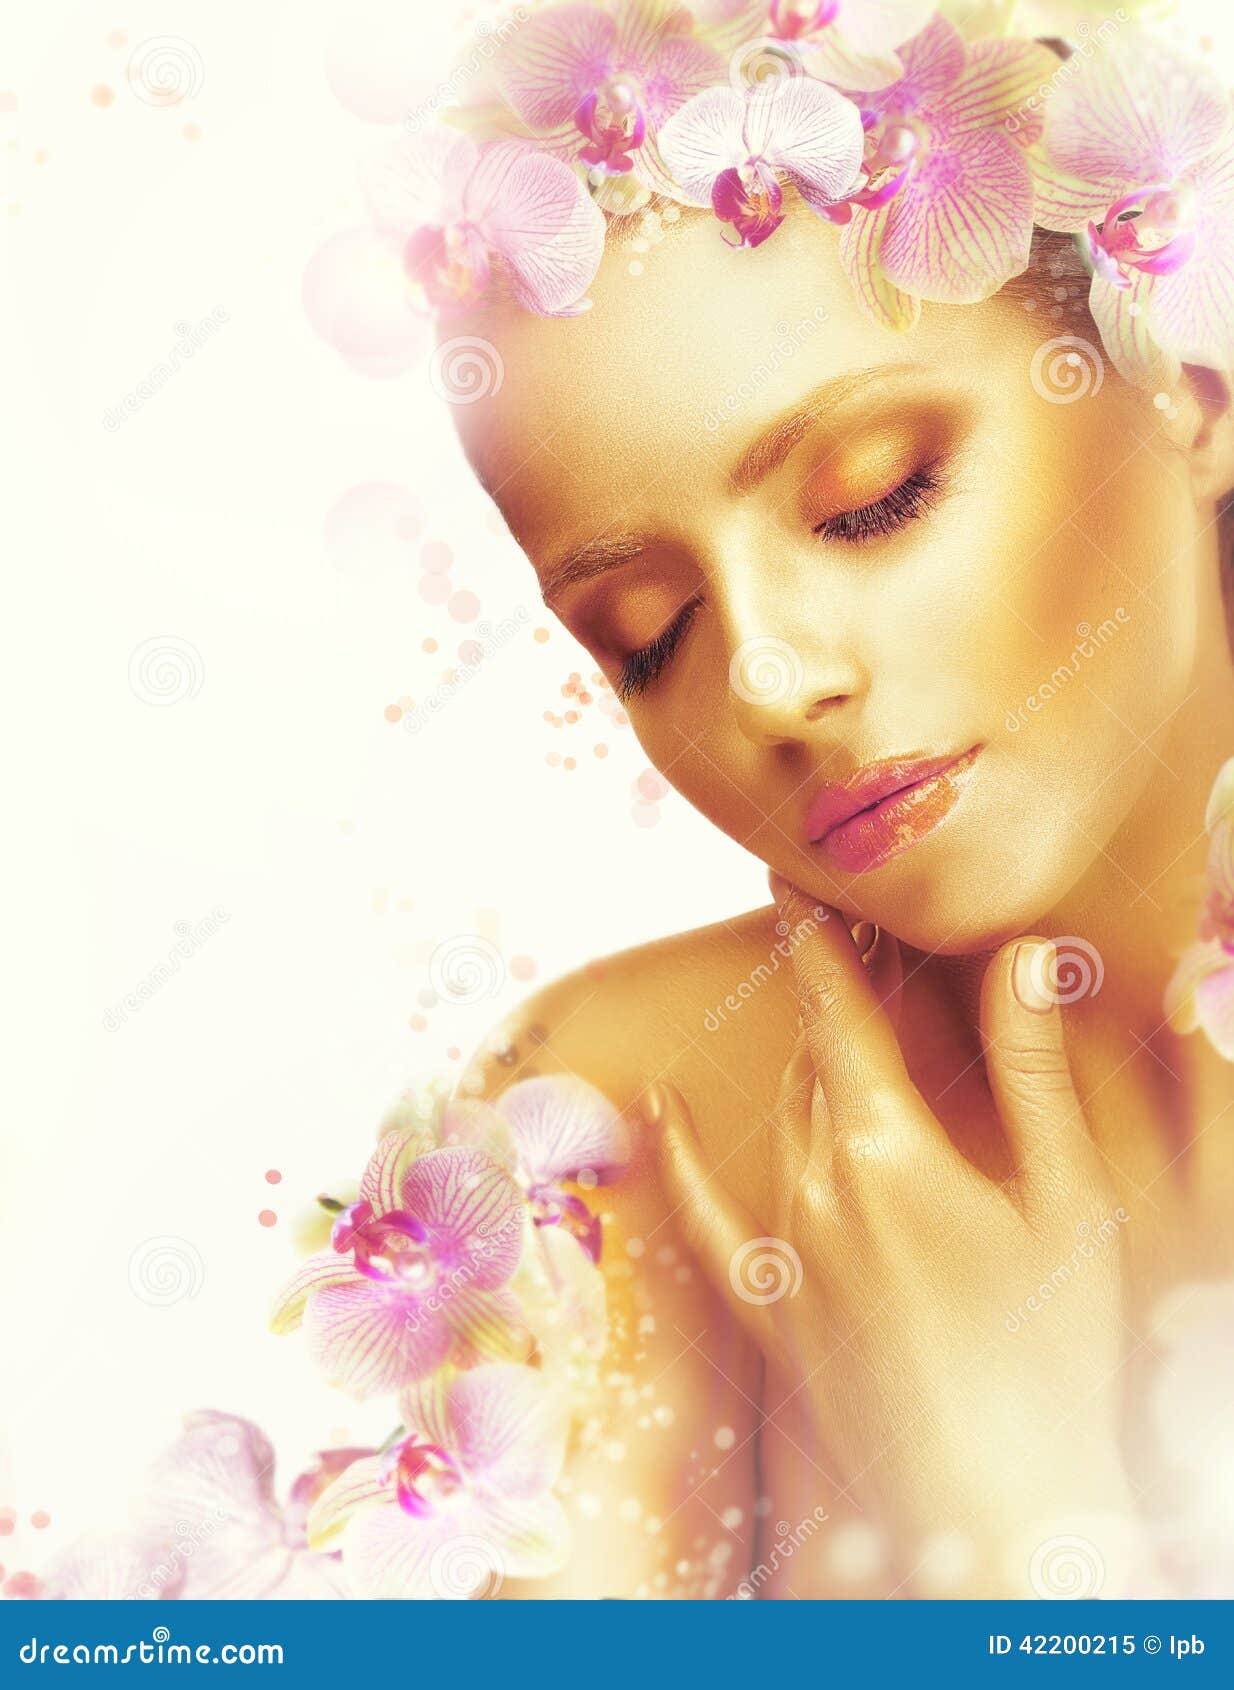 complexion. gorgeous woman with perfect bronzed skin and orchid flowers. fragrance